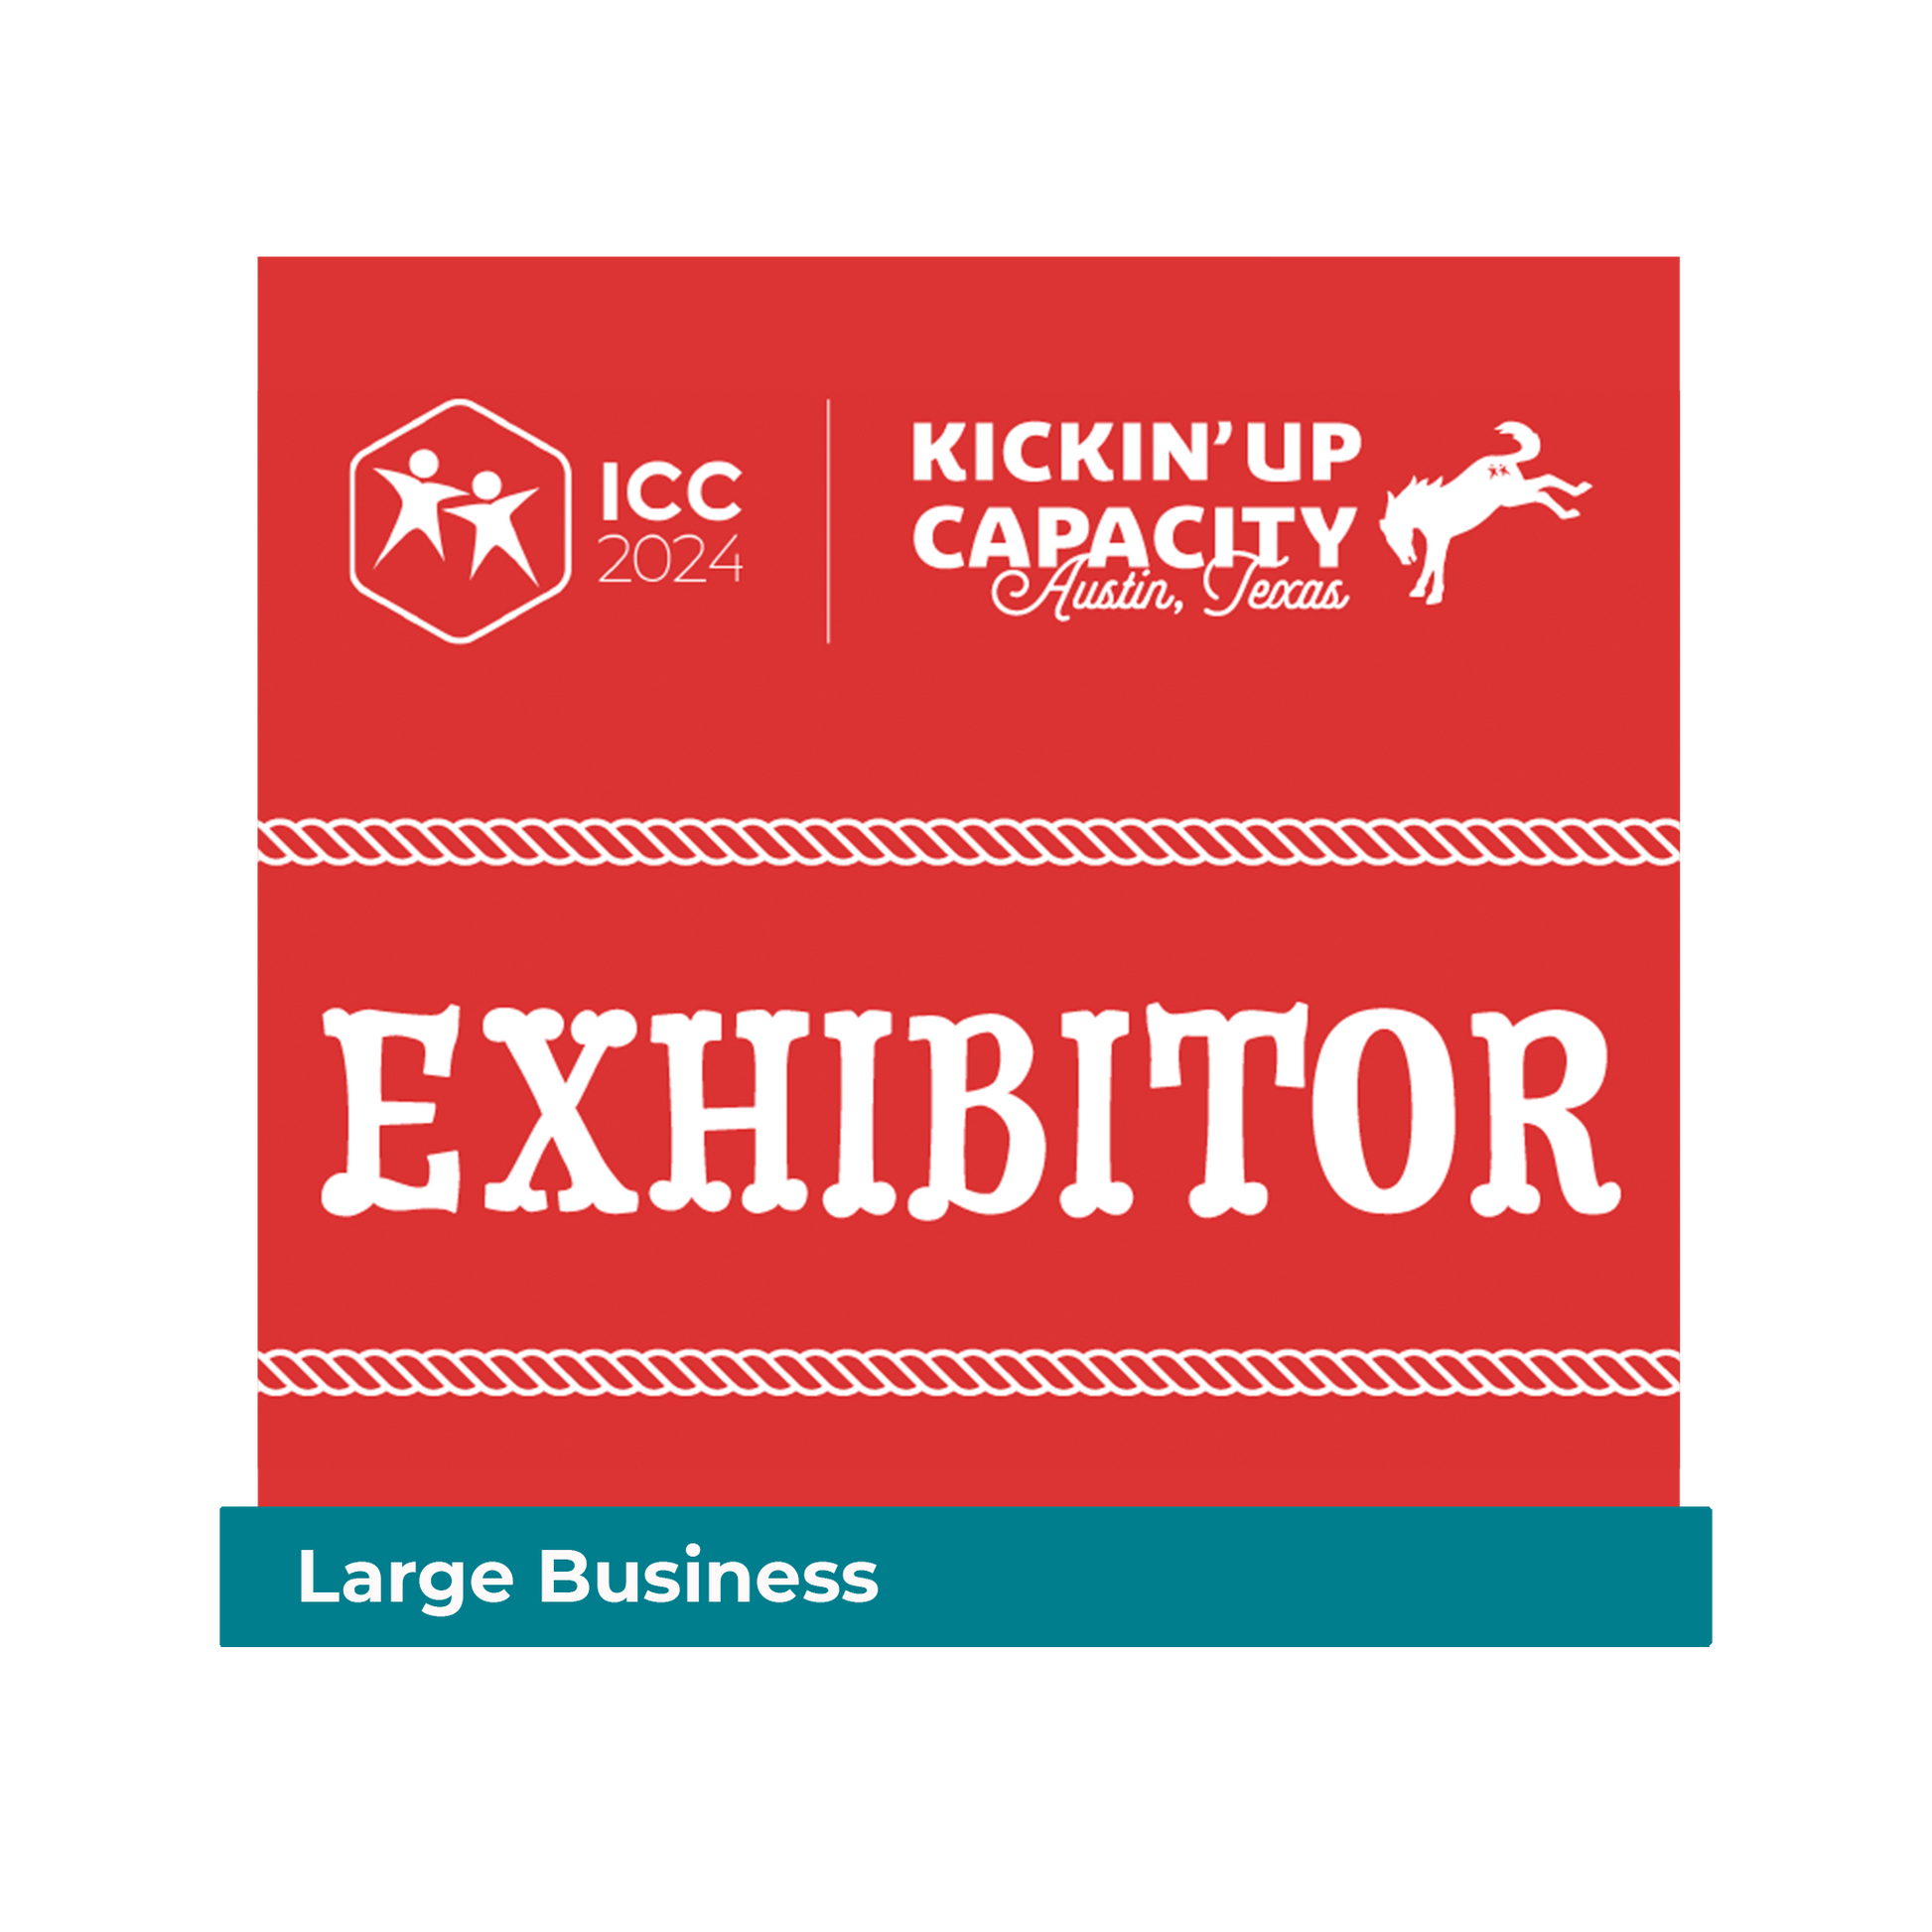 White logo on a red background for ICC 2024 with text about the exhibitor opportunity with a horse graphic kicking it's hind legs up.